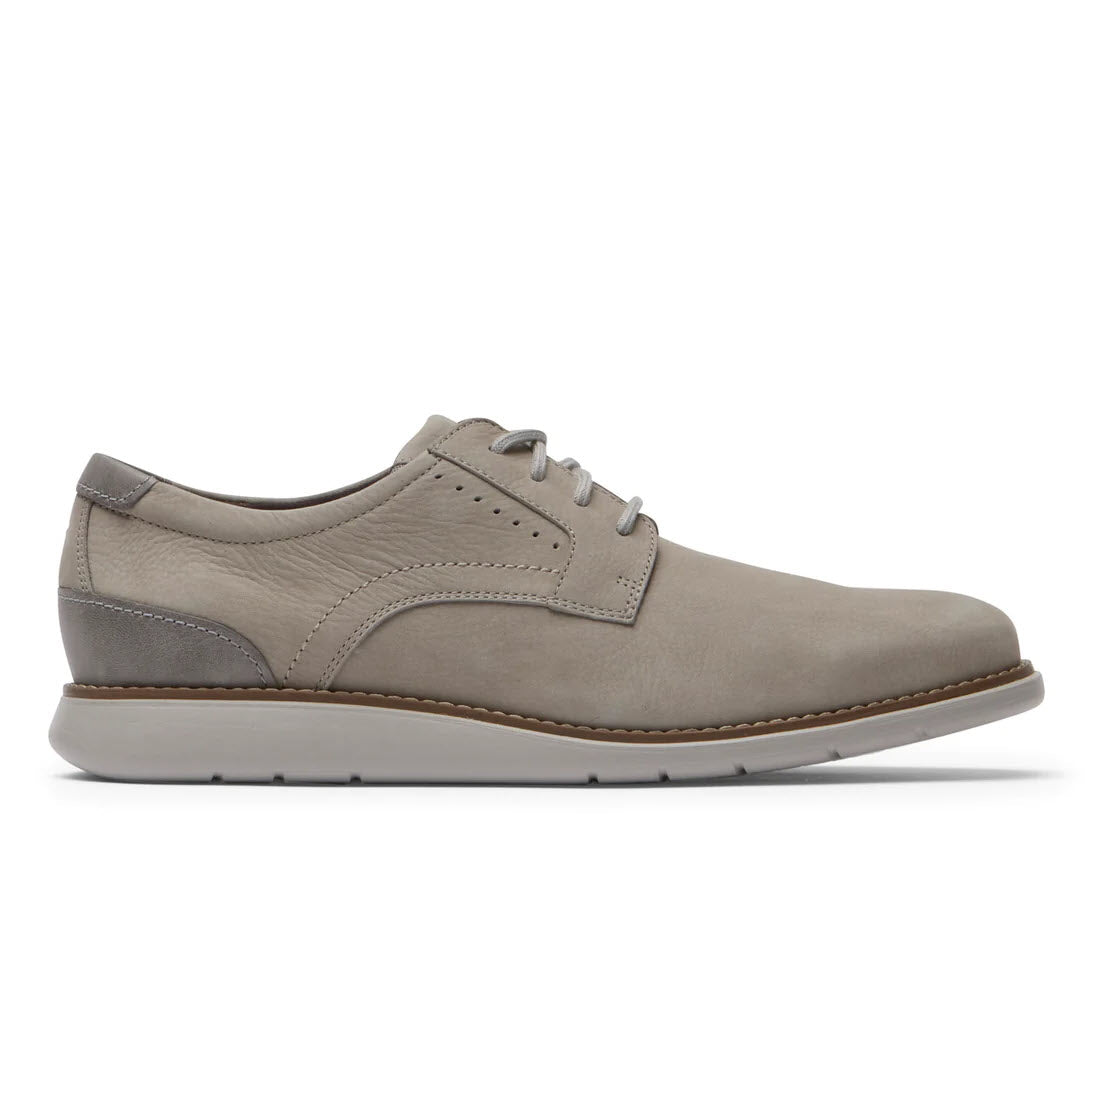 A single grey men's Rockport Total Motion Craft Plain Toe Taupe oxford shoe with lace-up closure, featuring stitching details and a light brown IMEVA sole.